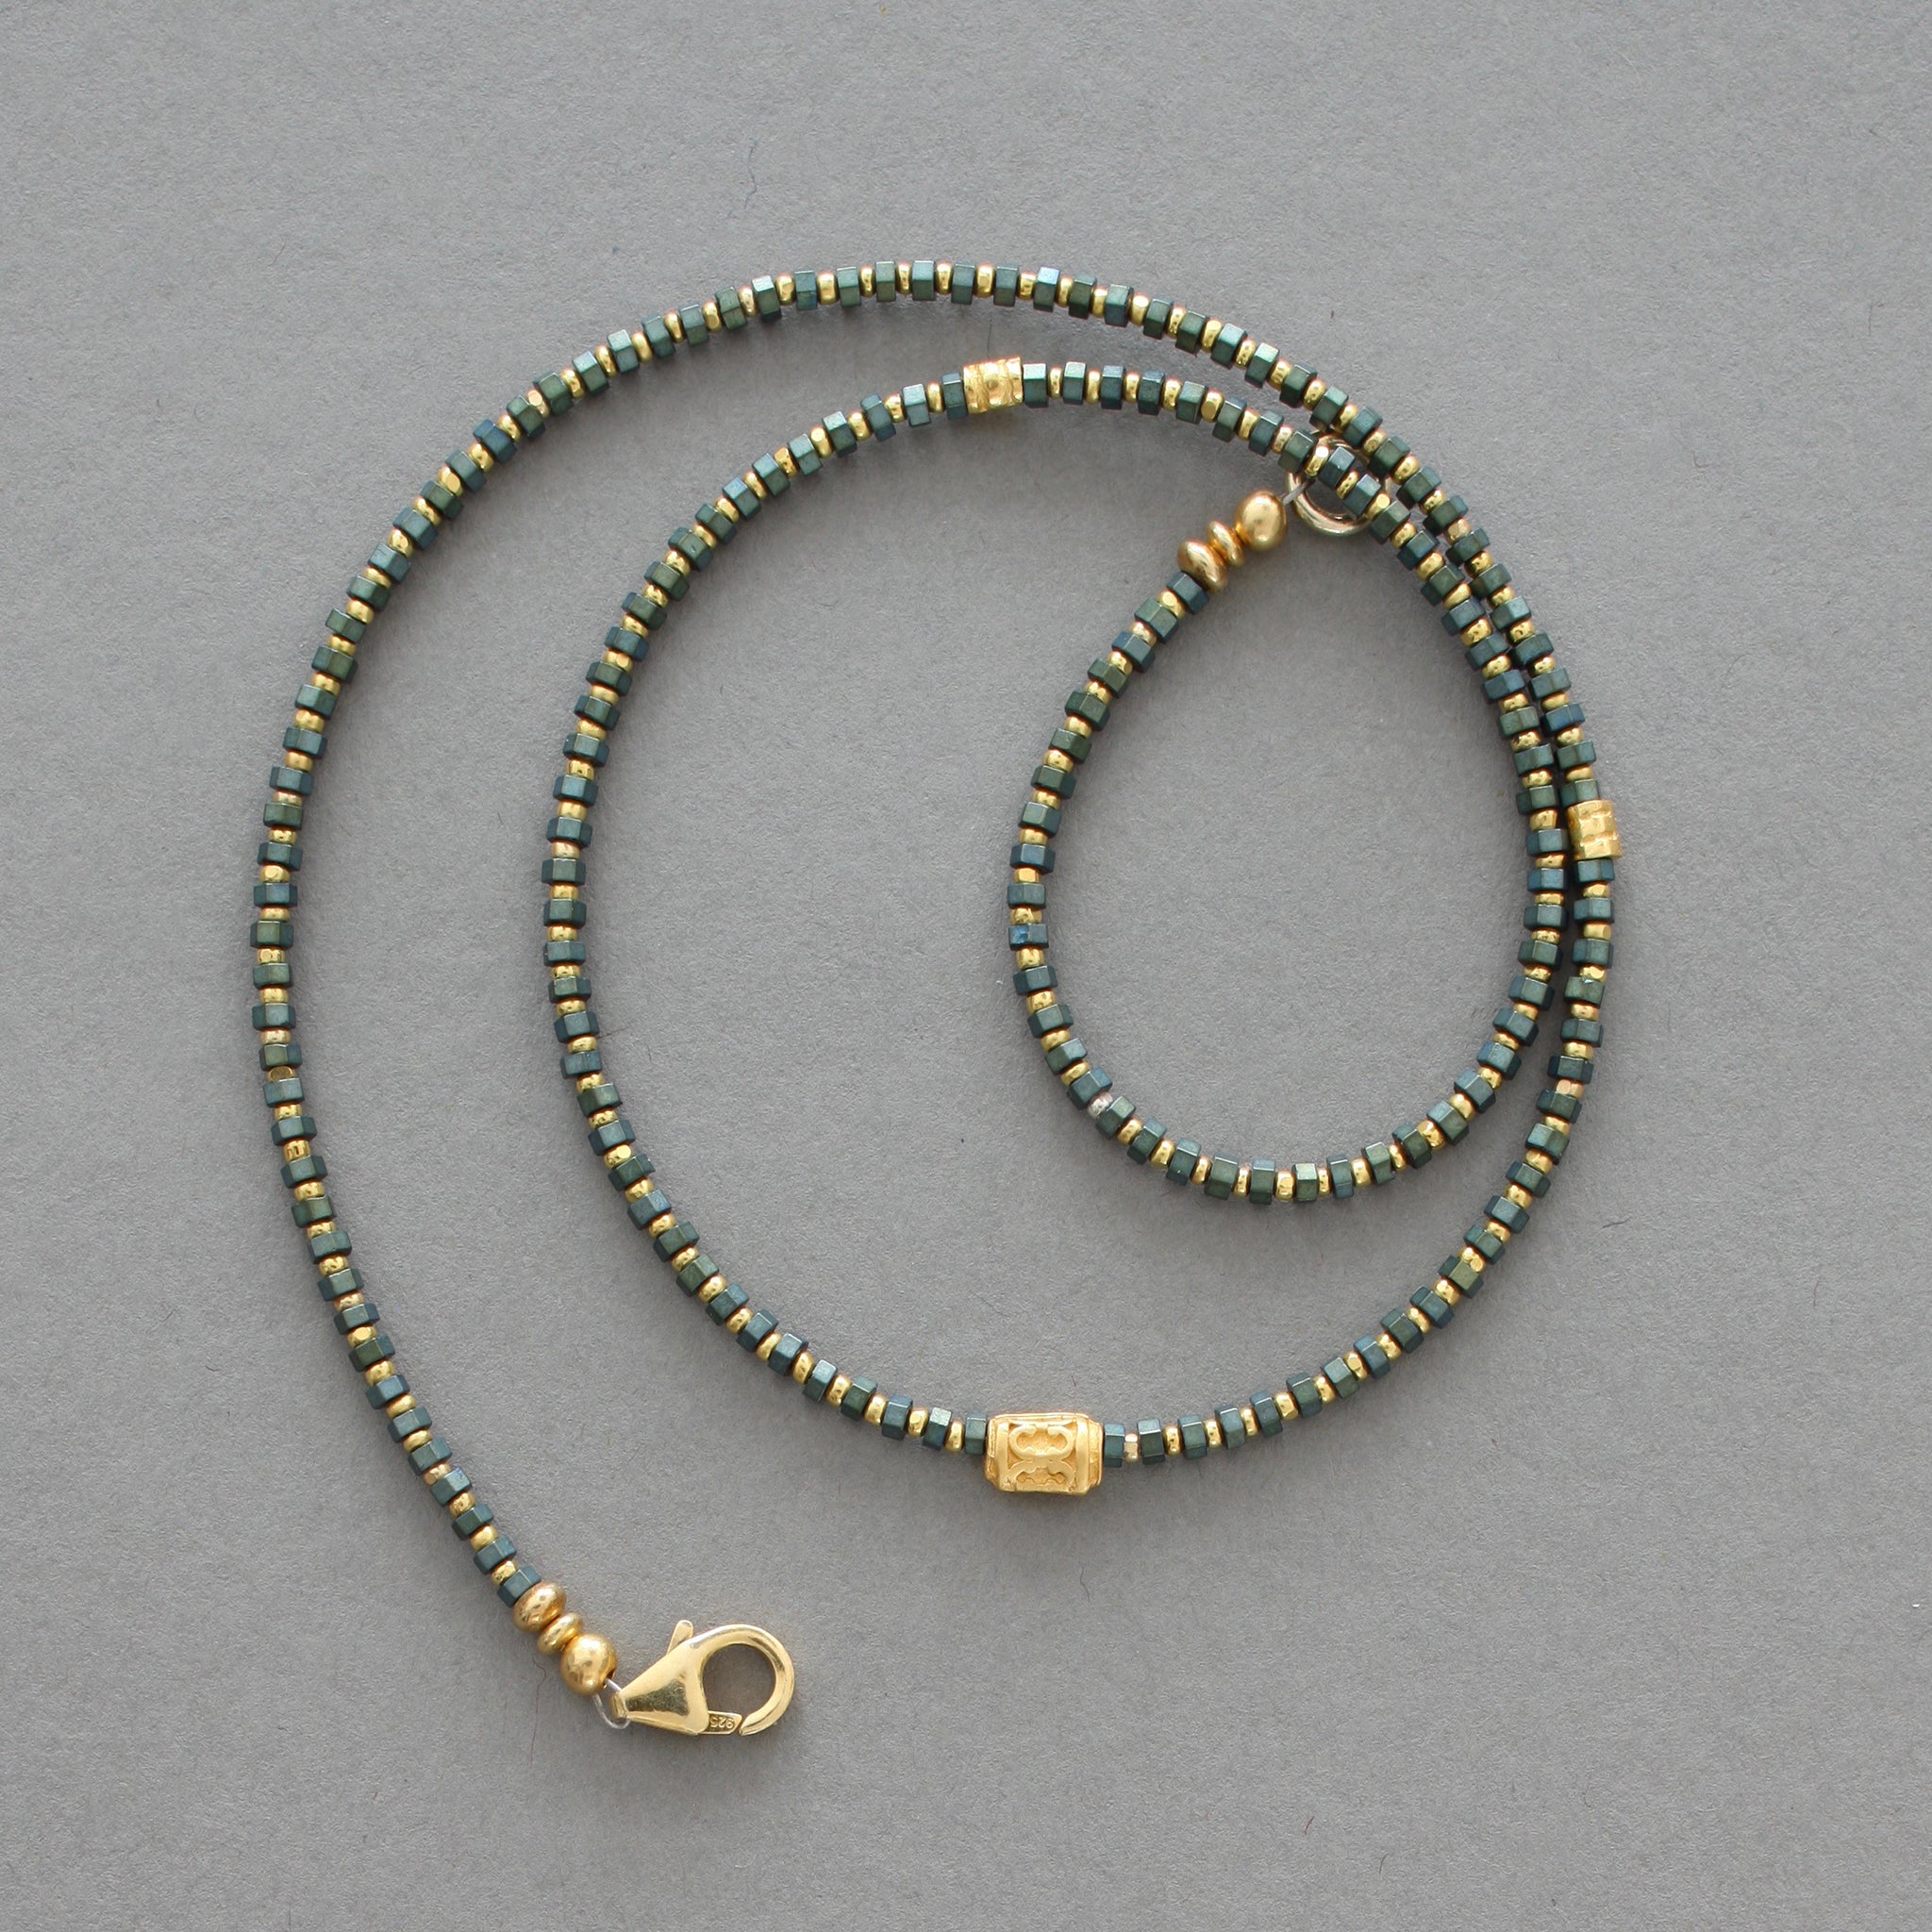 Green Hematite and Aztec Gold Necklace